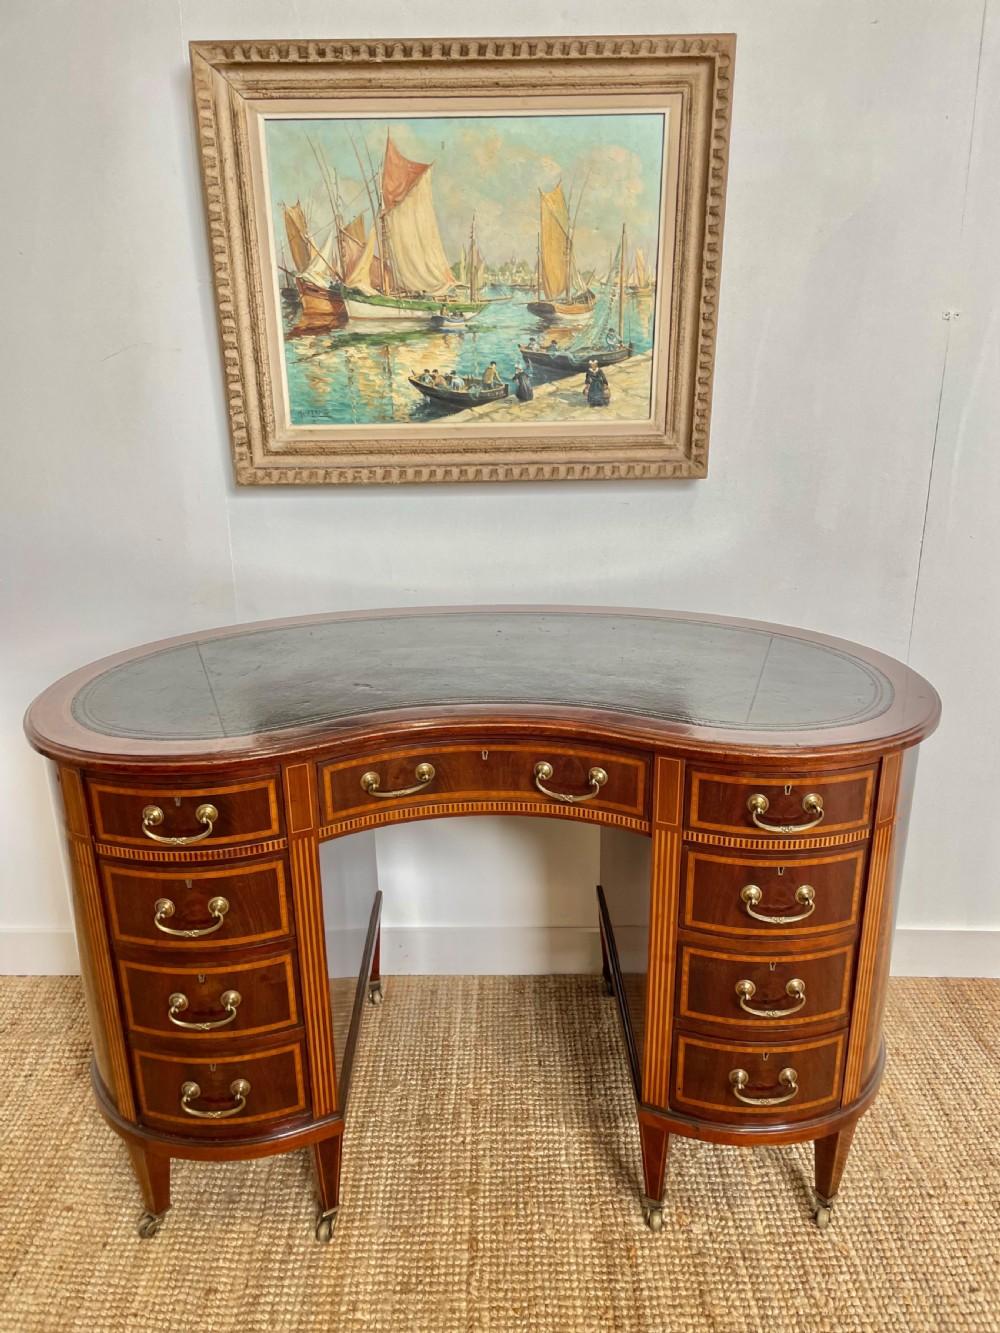 Very good quality early 20th century mahogany and inlaid writing desk
English circa 1900 with original brass handles , castors and leather insert
Having 9 mahogany lined drawers , this a very practical neat sized desk , would all so make a great